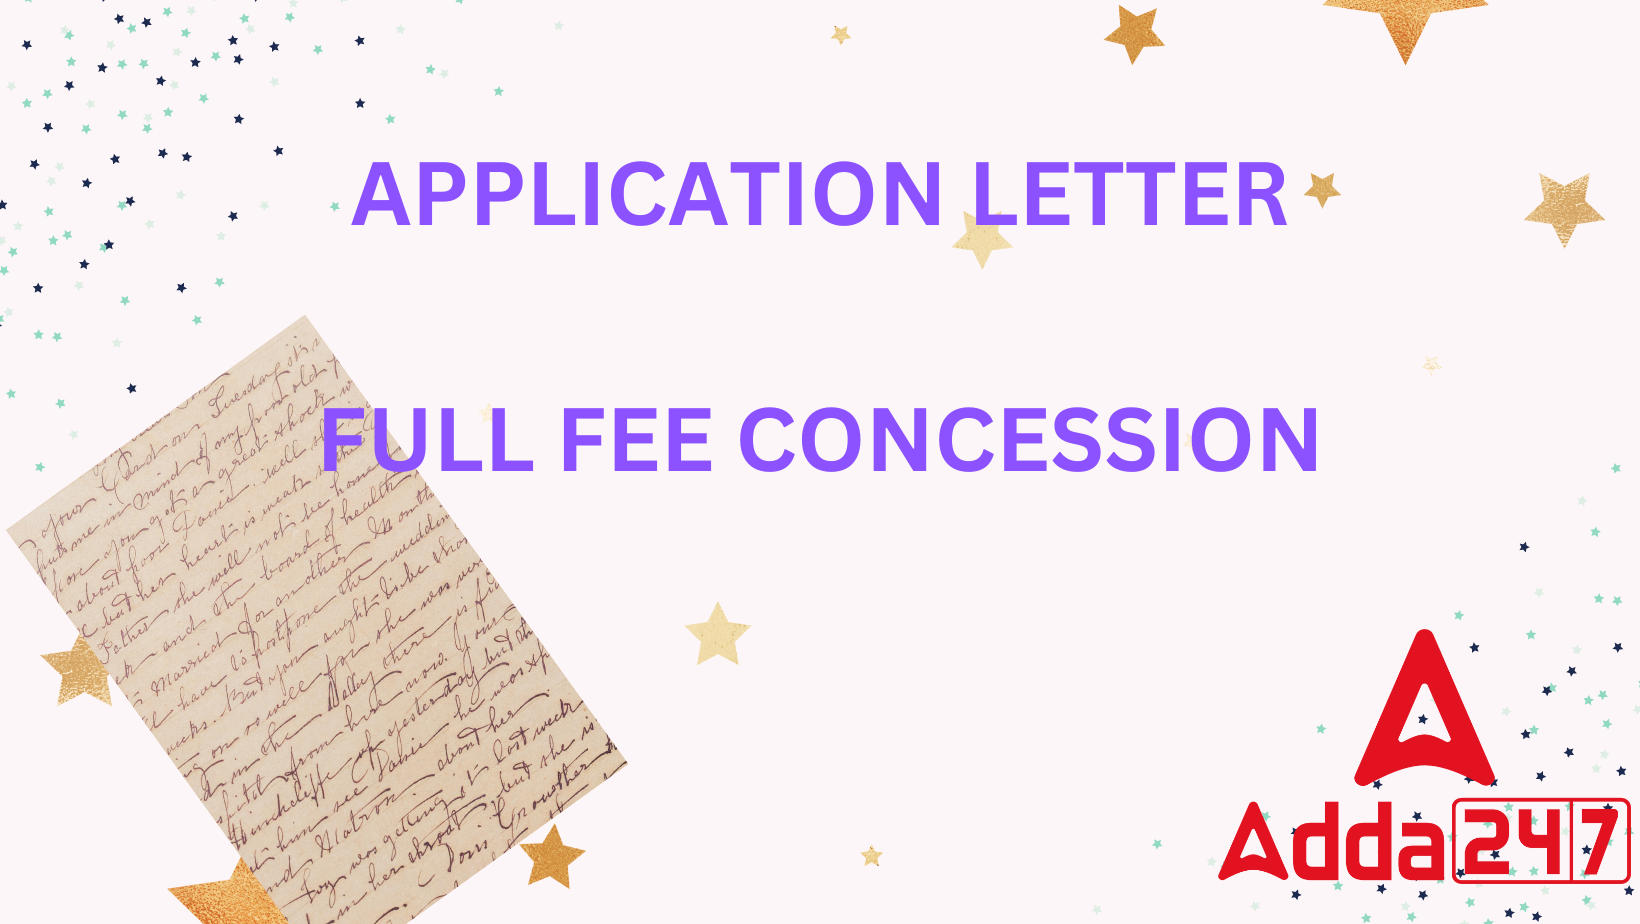 Application for Fee Concession, Full Fee Concession Application in English_30.1